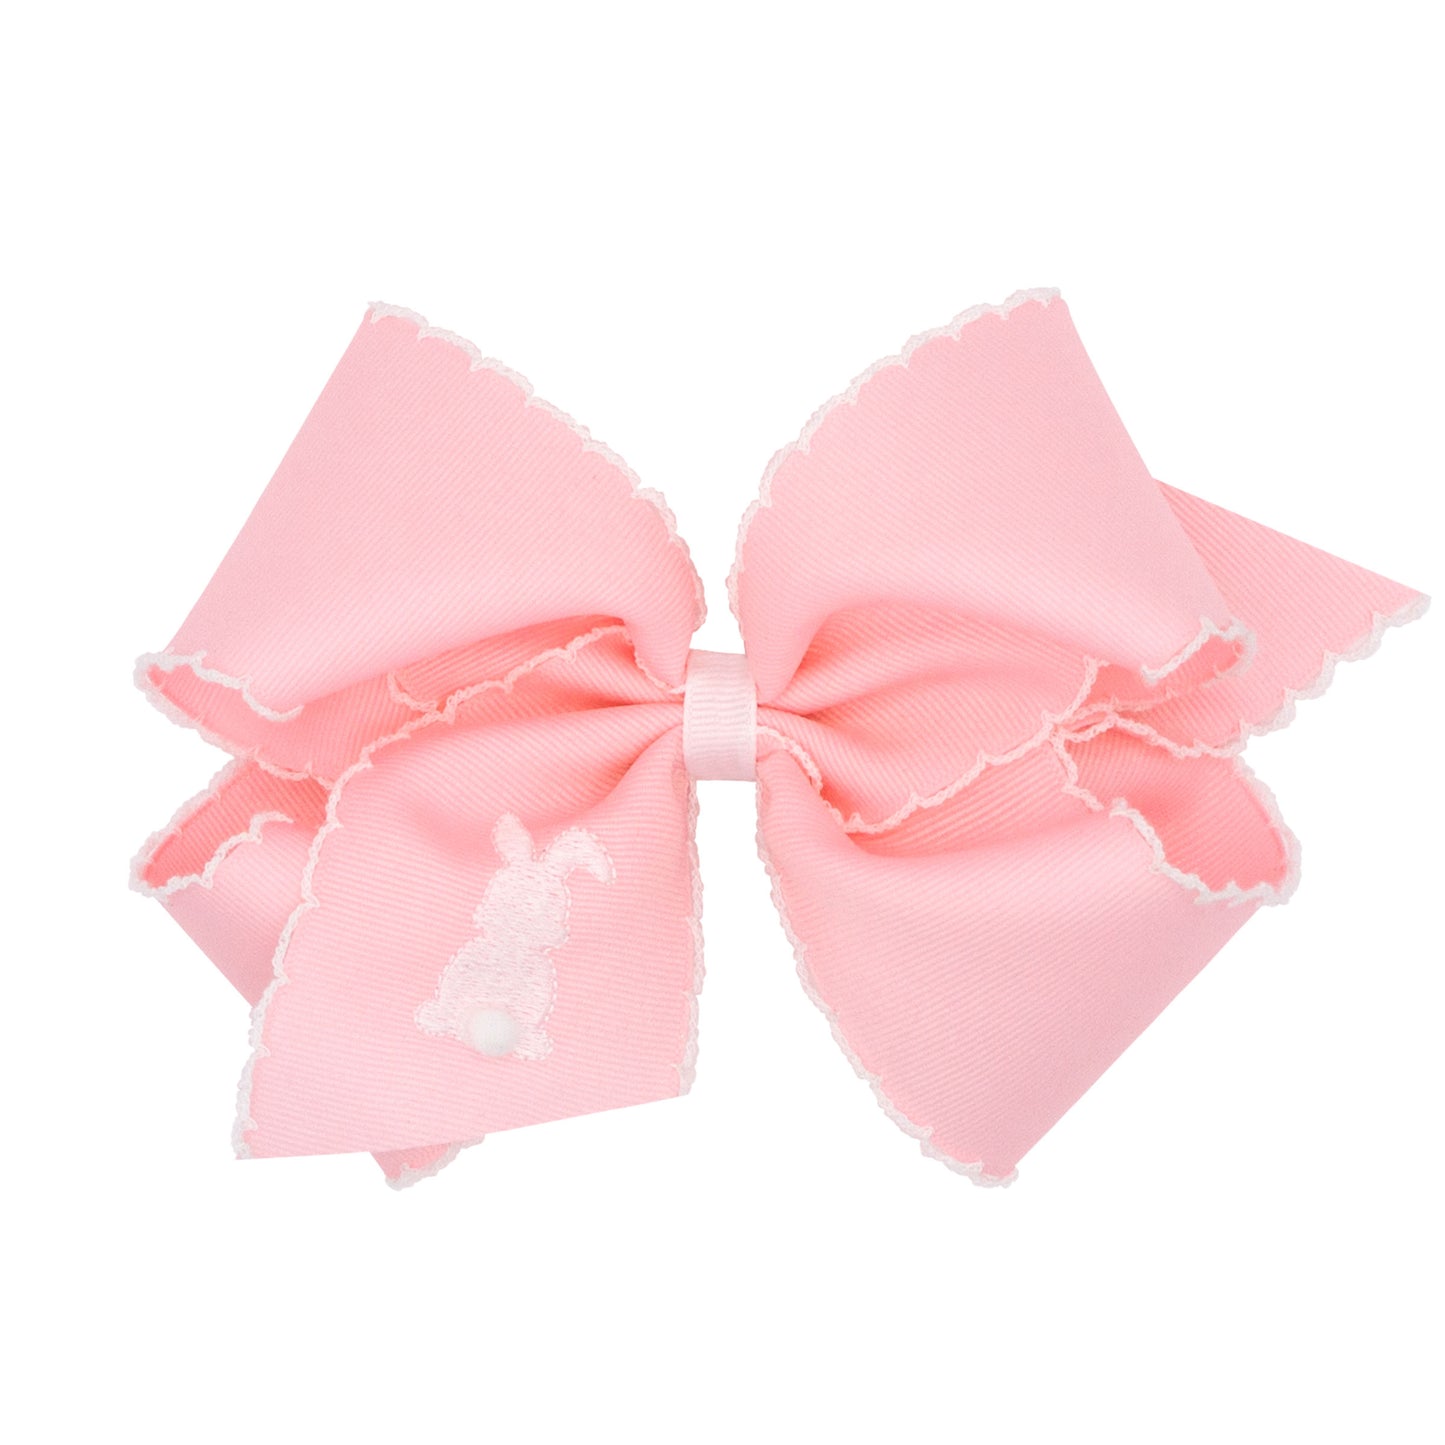 King White Grosgrain Girls Hair Bow with Moonstitch Edge and Easter Embroidery White BUNNY